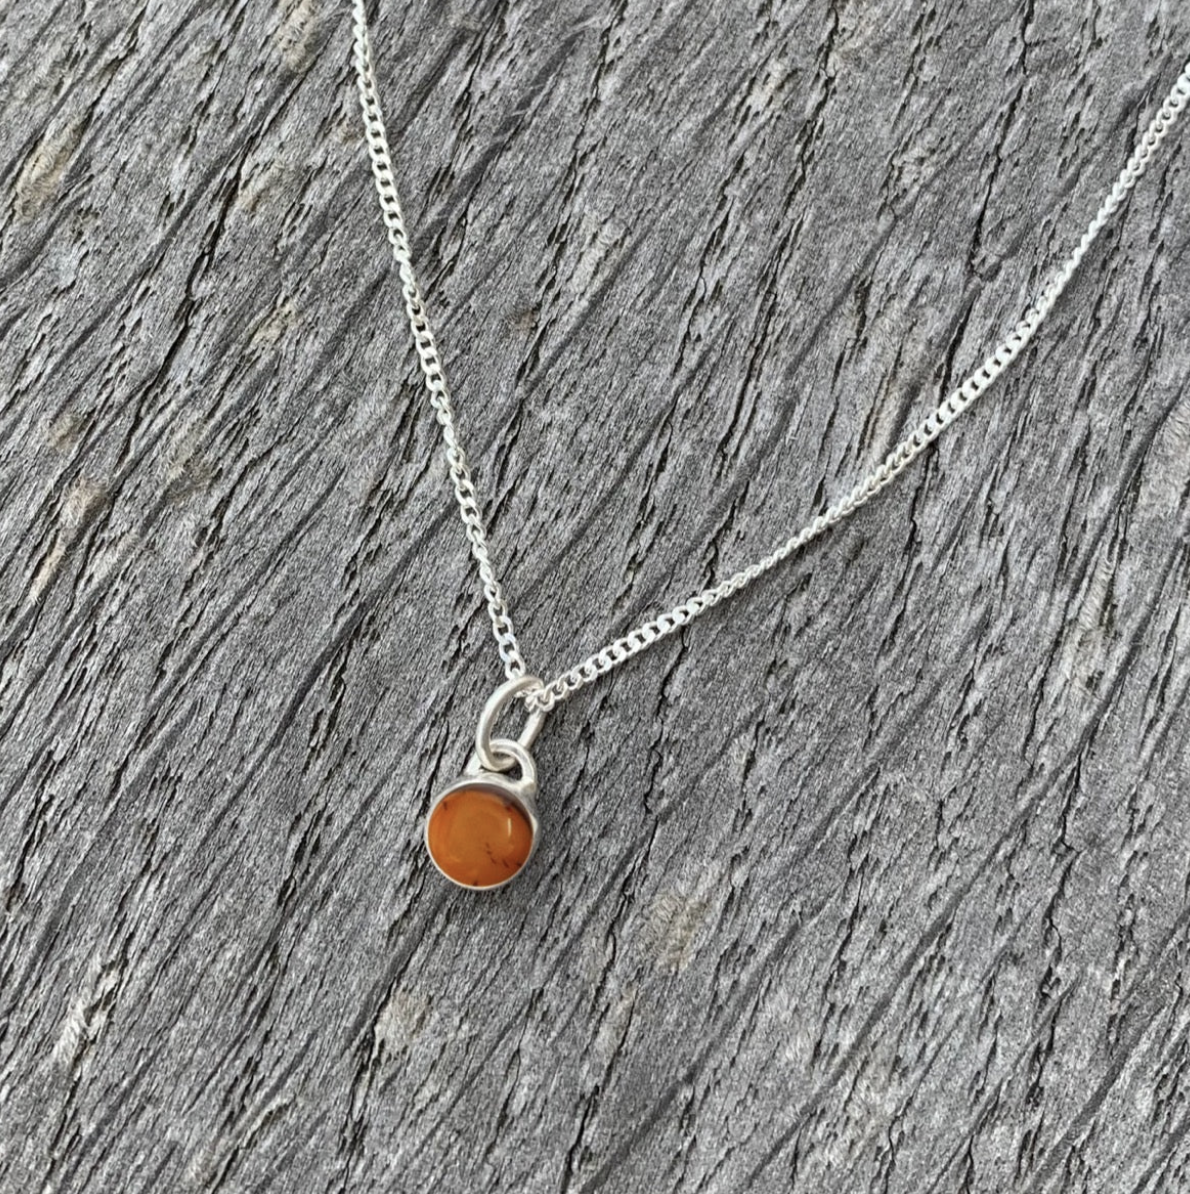 An amber and sterling silver charm necklace.